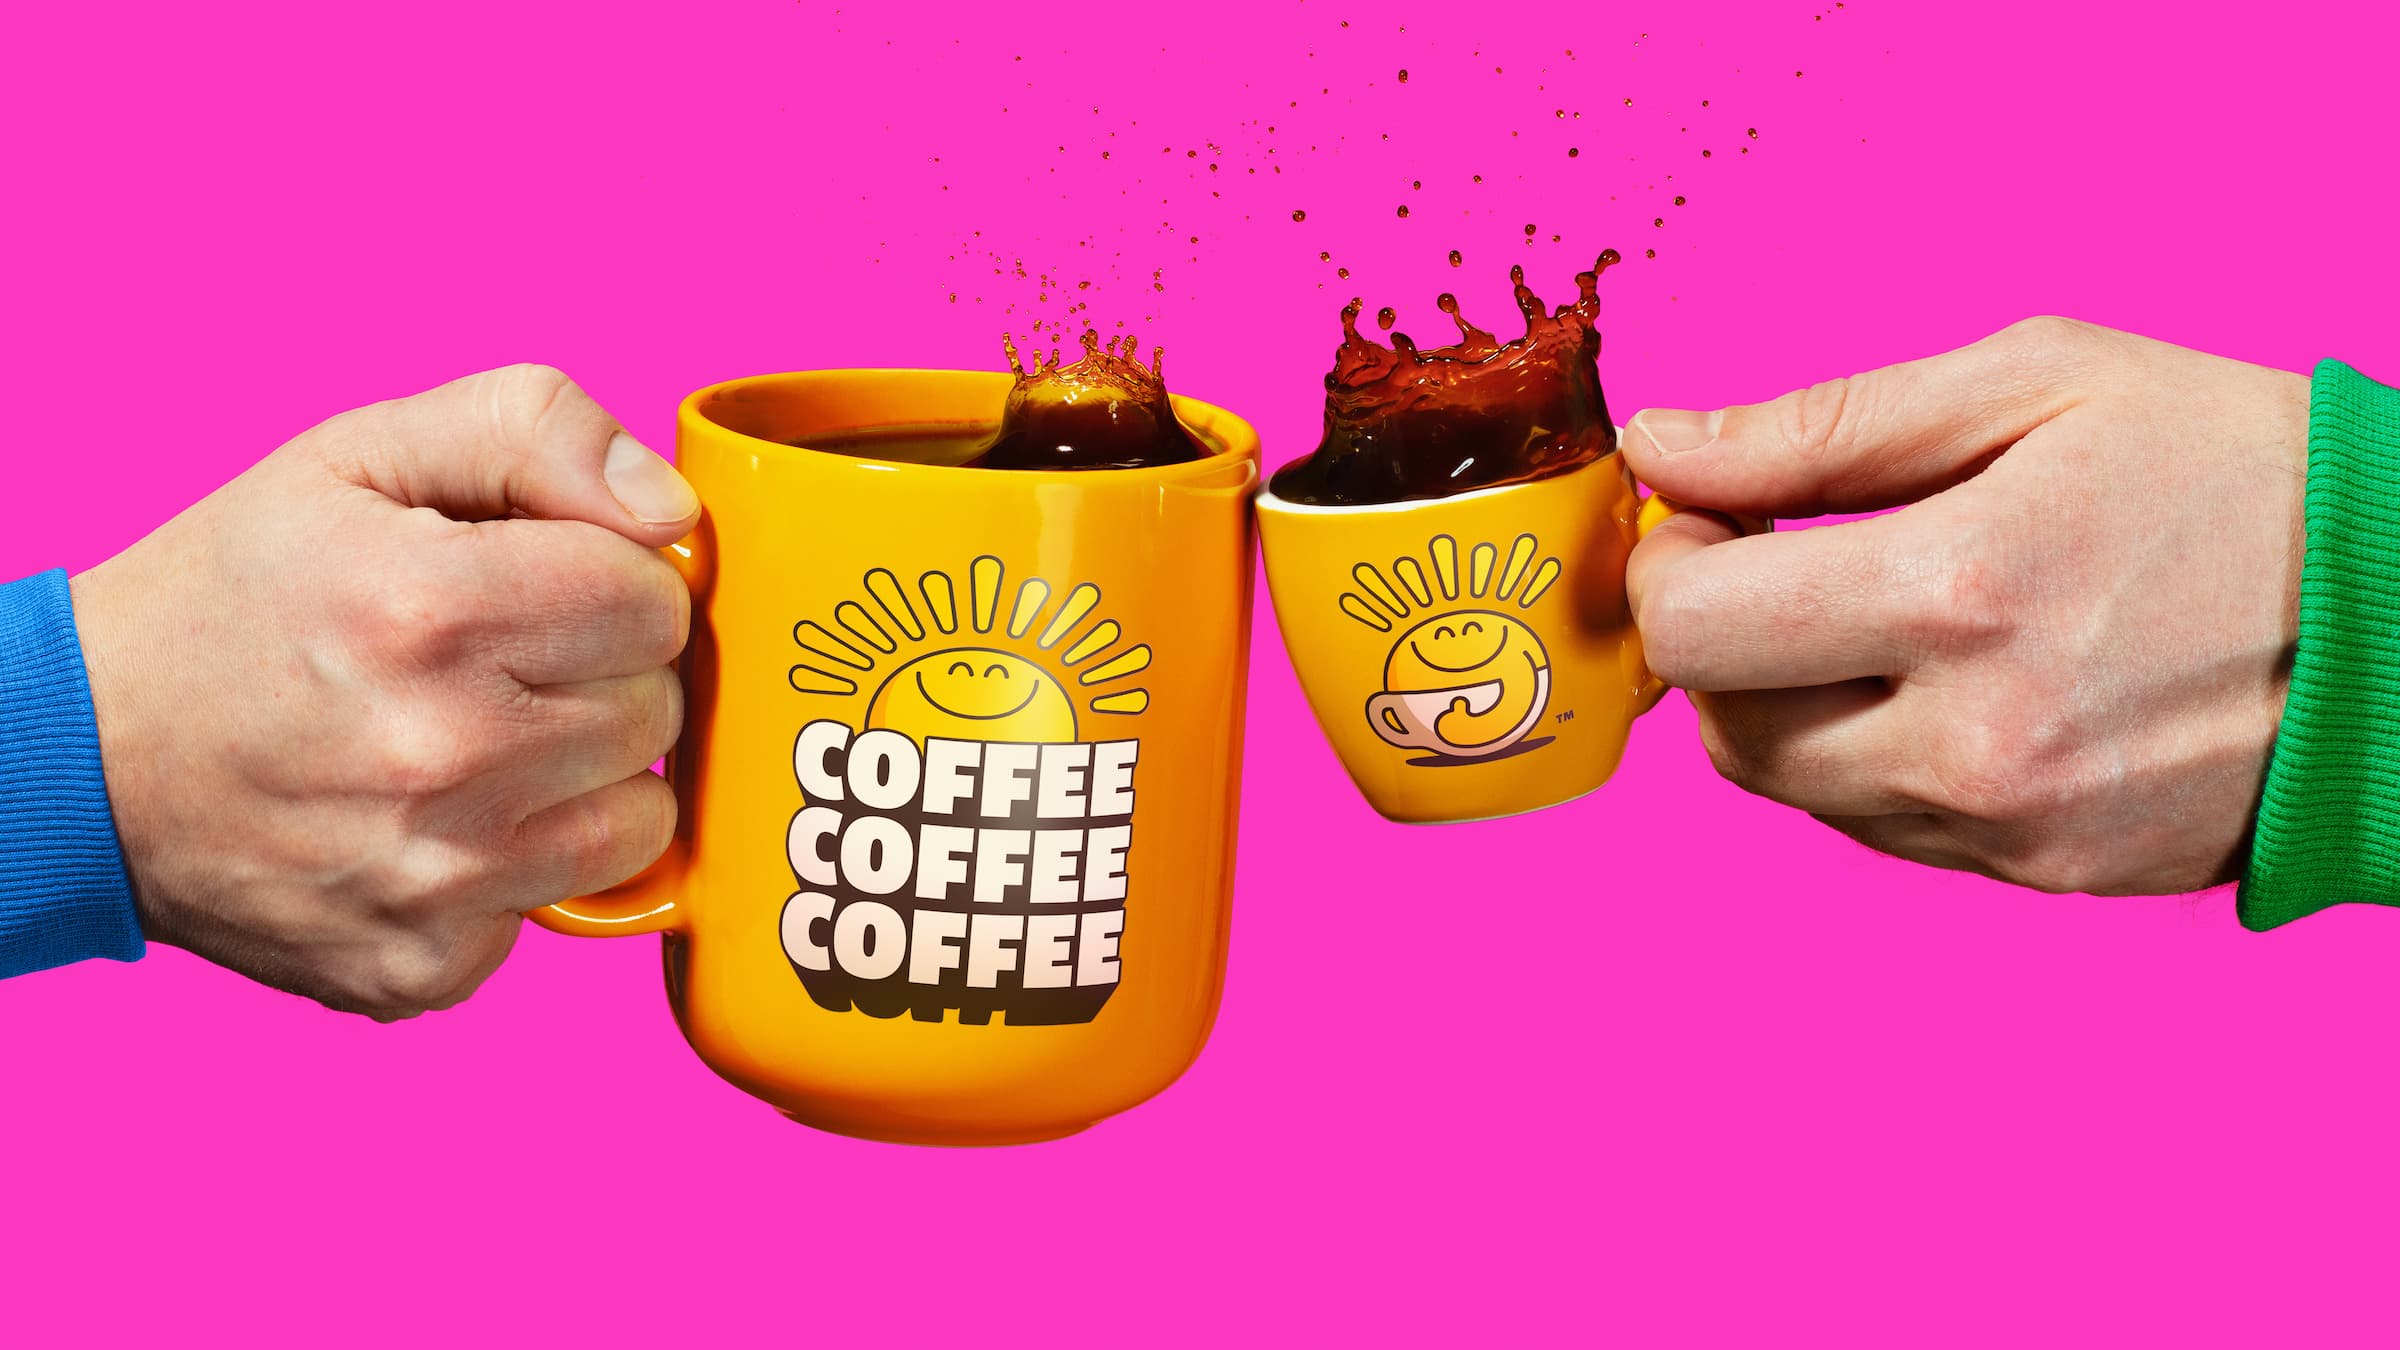 Merchandise: branded coffee cups for Top of the Mornin’ Coffee by London-based Earthling Studio.